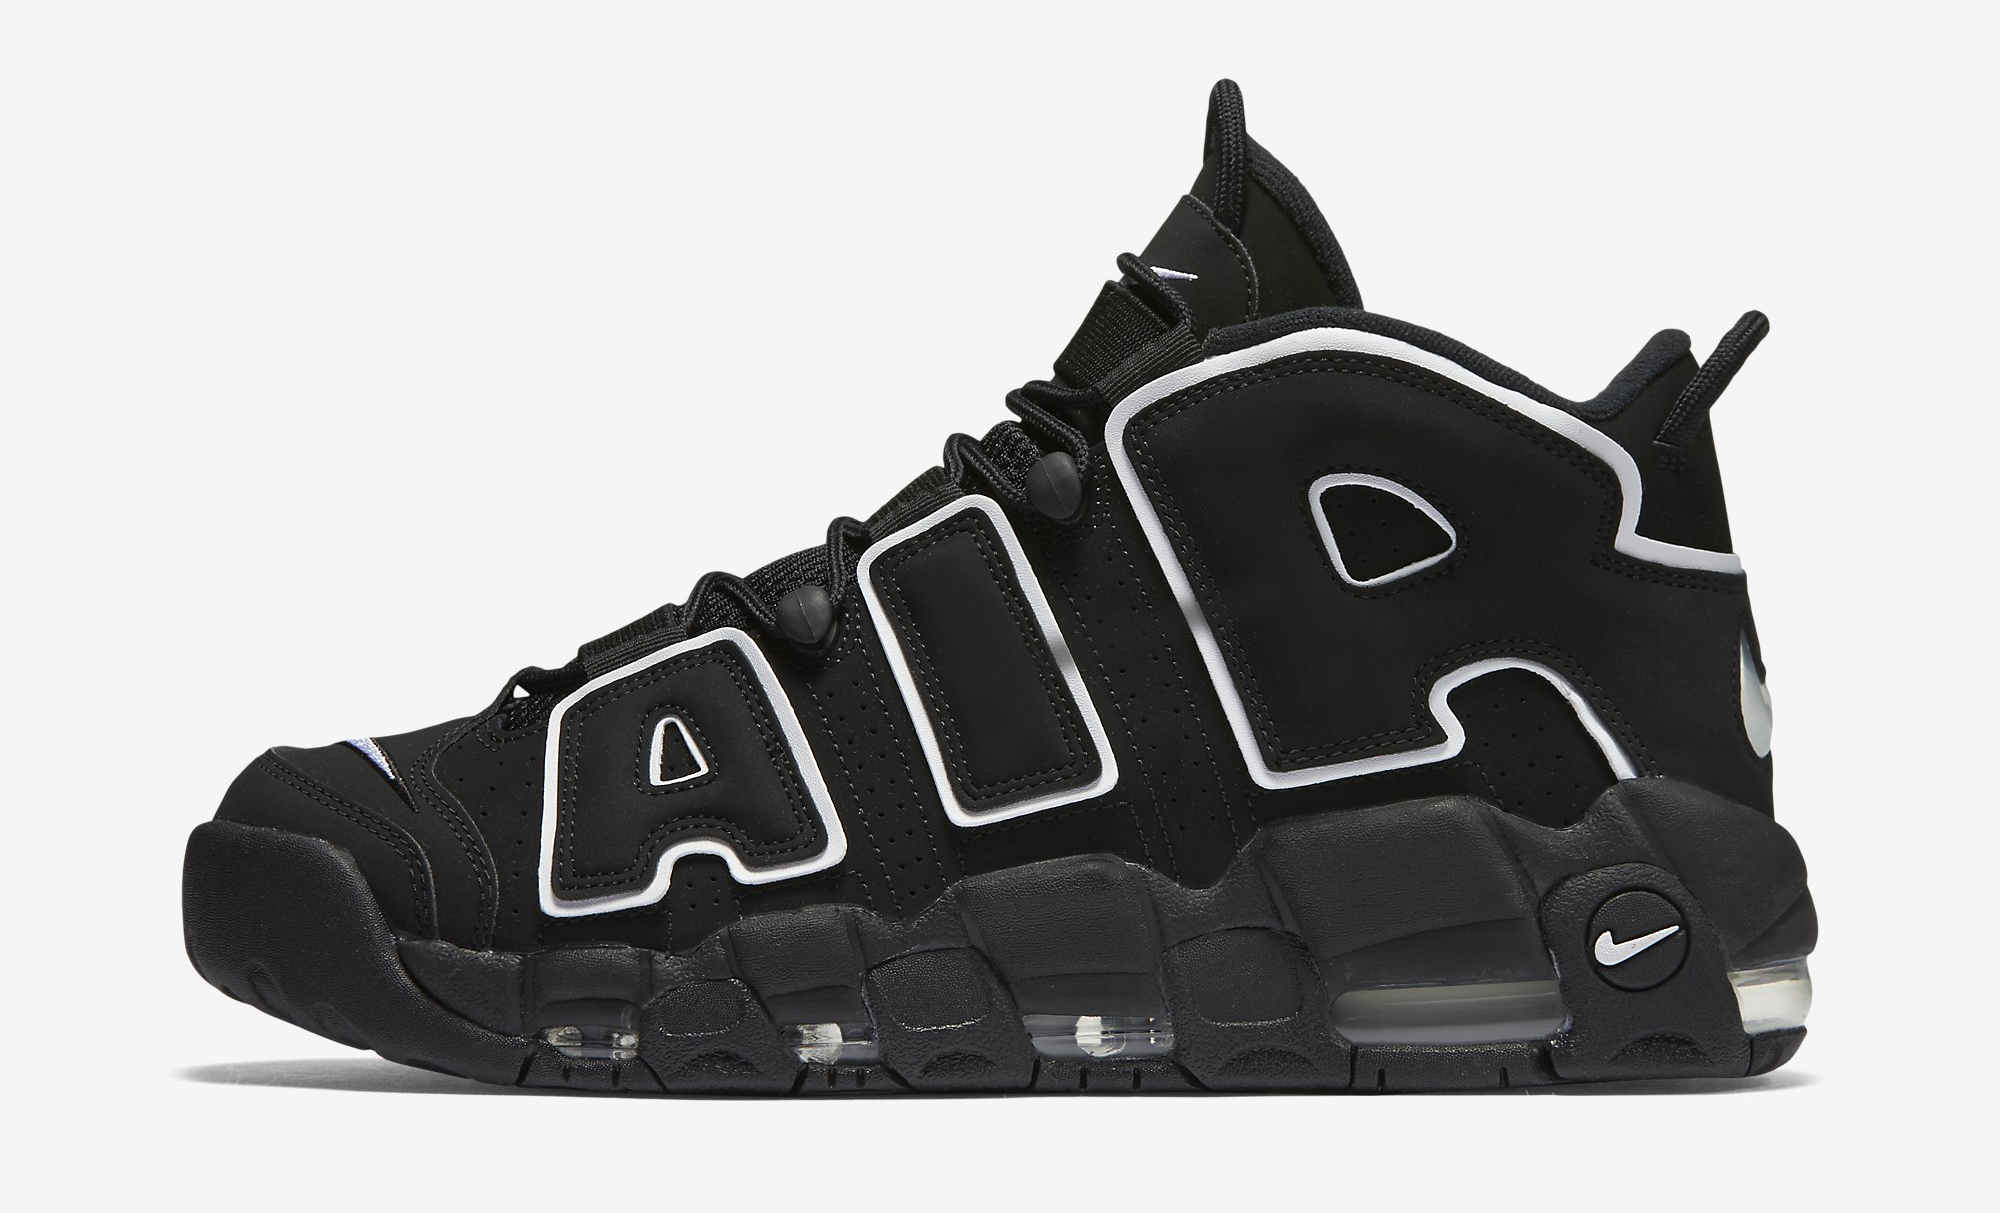 sneakers that say air on the side